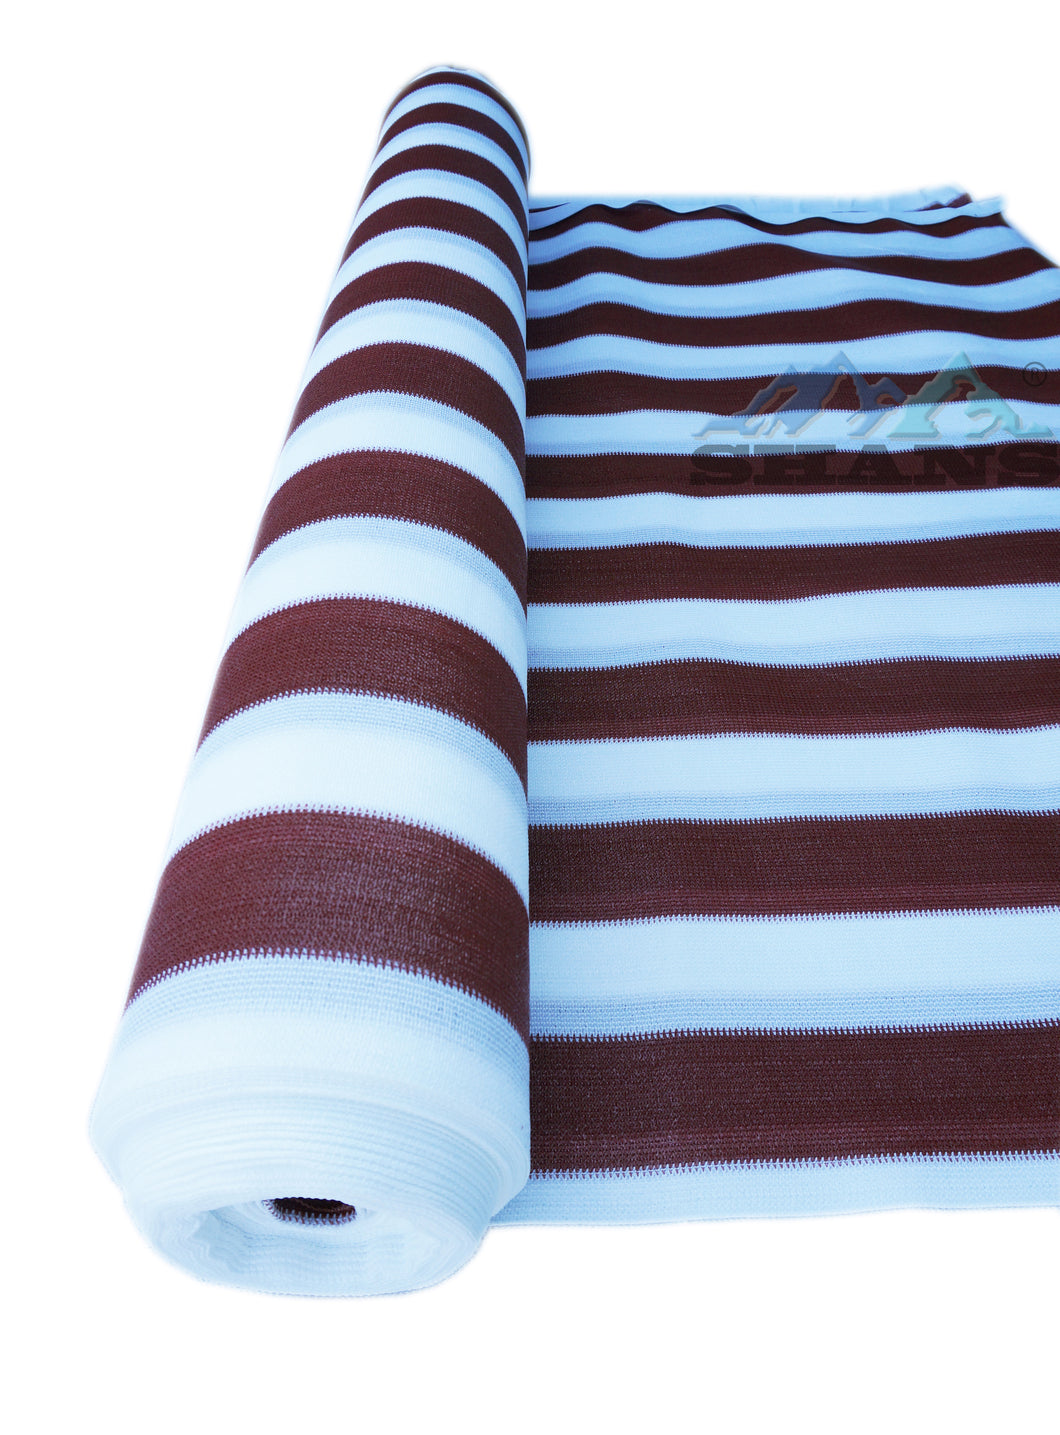 SHANS Shade Sail Fabric Outdoor Shade Cover Maroon and White Stripes with Free Clips Plastic Grommets Plastic Grommets